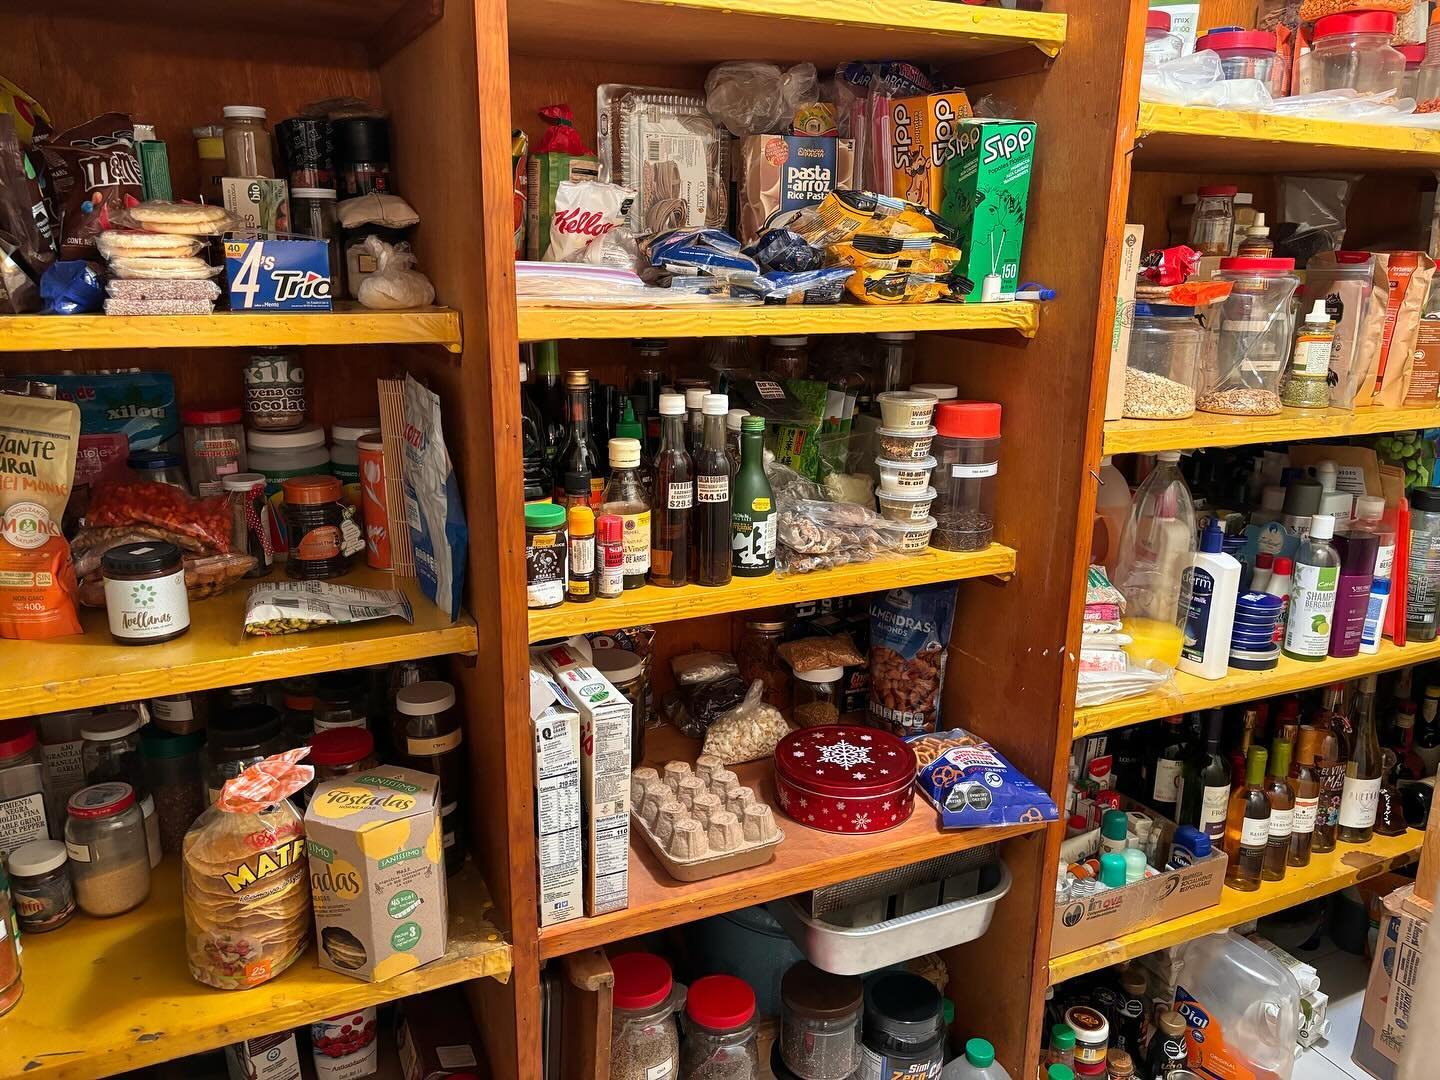 Nothing describes my mother better than her pantry.

Yes, it sucks that she passed away so suddenly, she was lucid, active, and present. 

But she was crystal clear that under no circumstances she wanted to reach a point and/or live without being luc